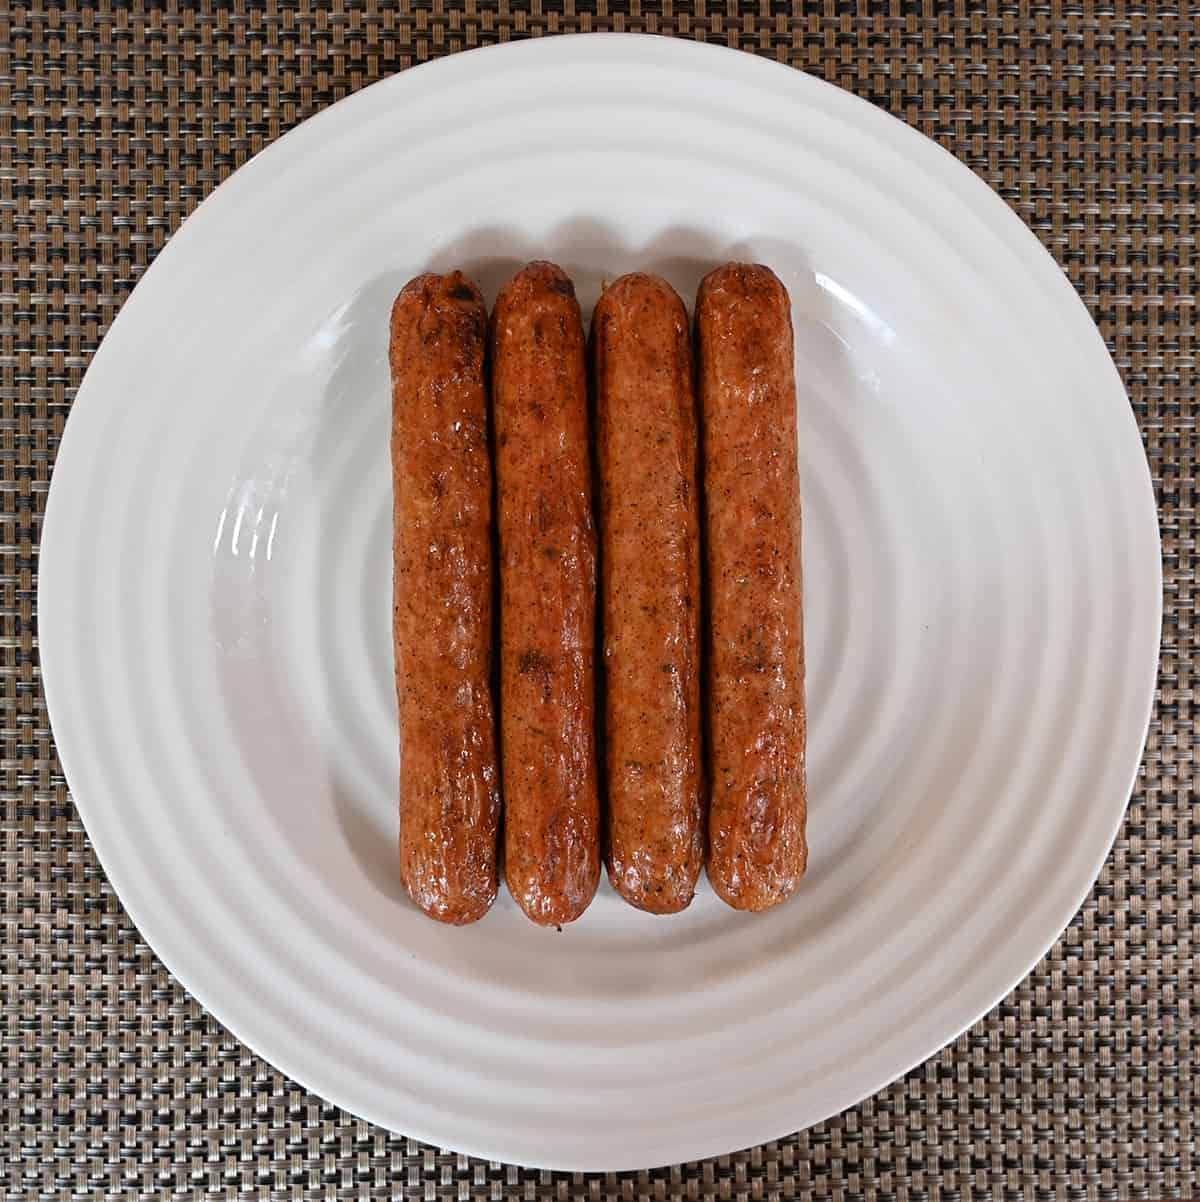 Top down image of four cooked andouille sausages served on a white plate.